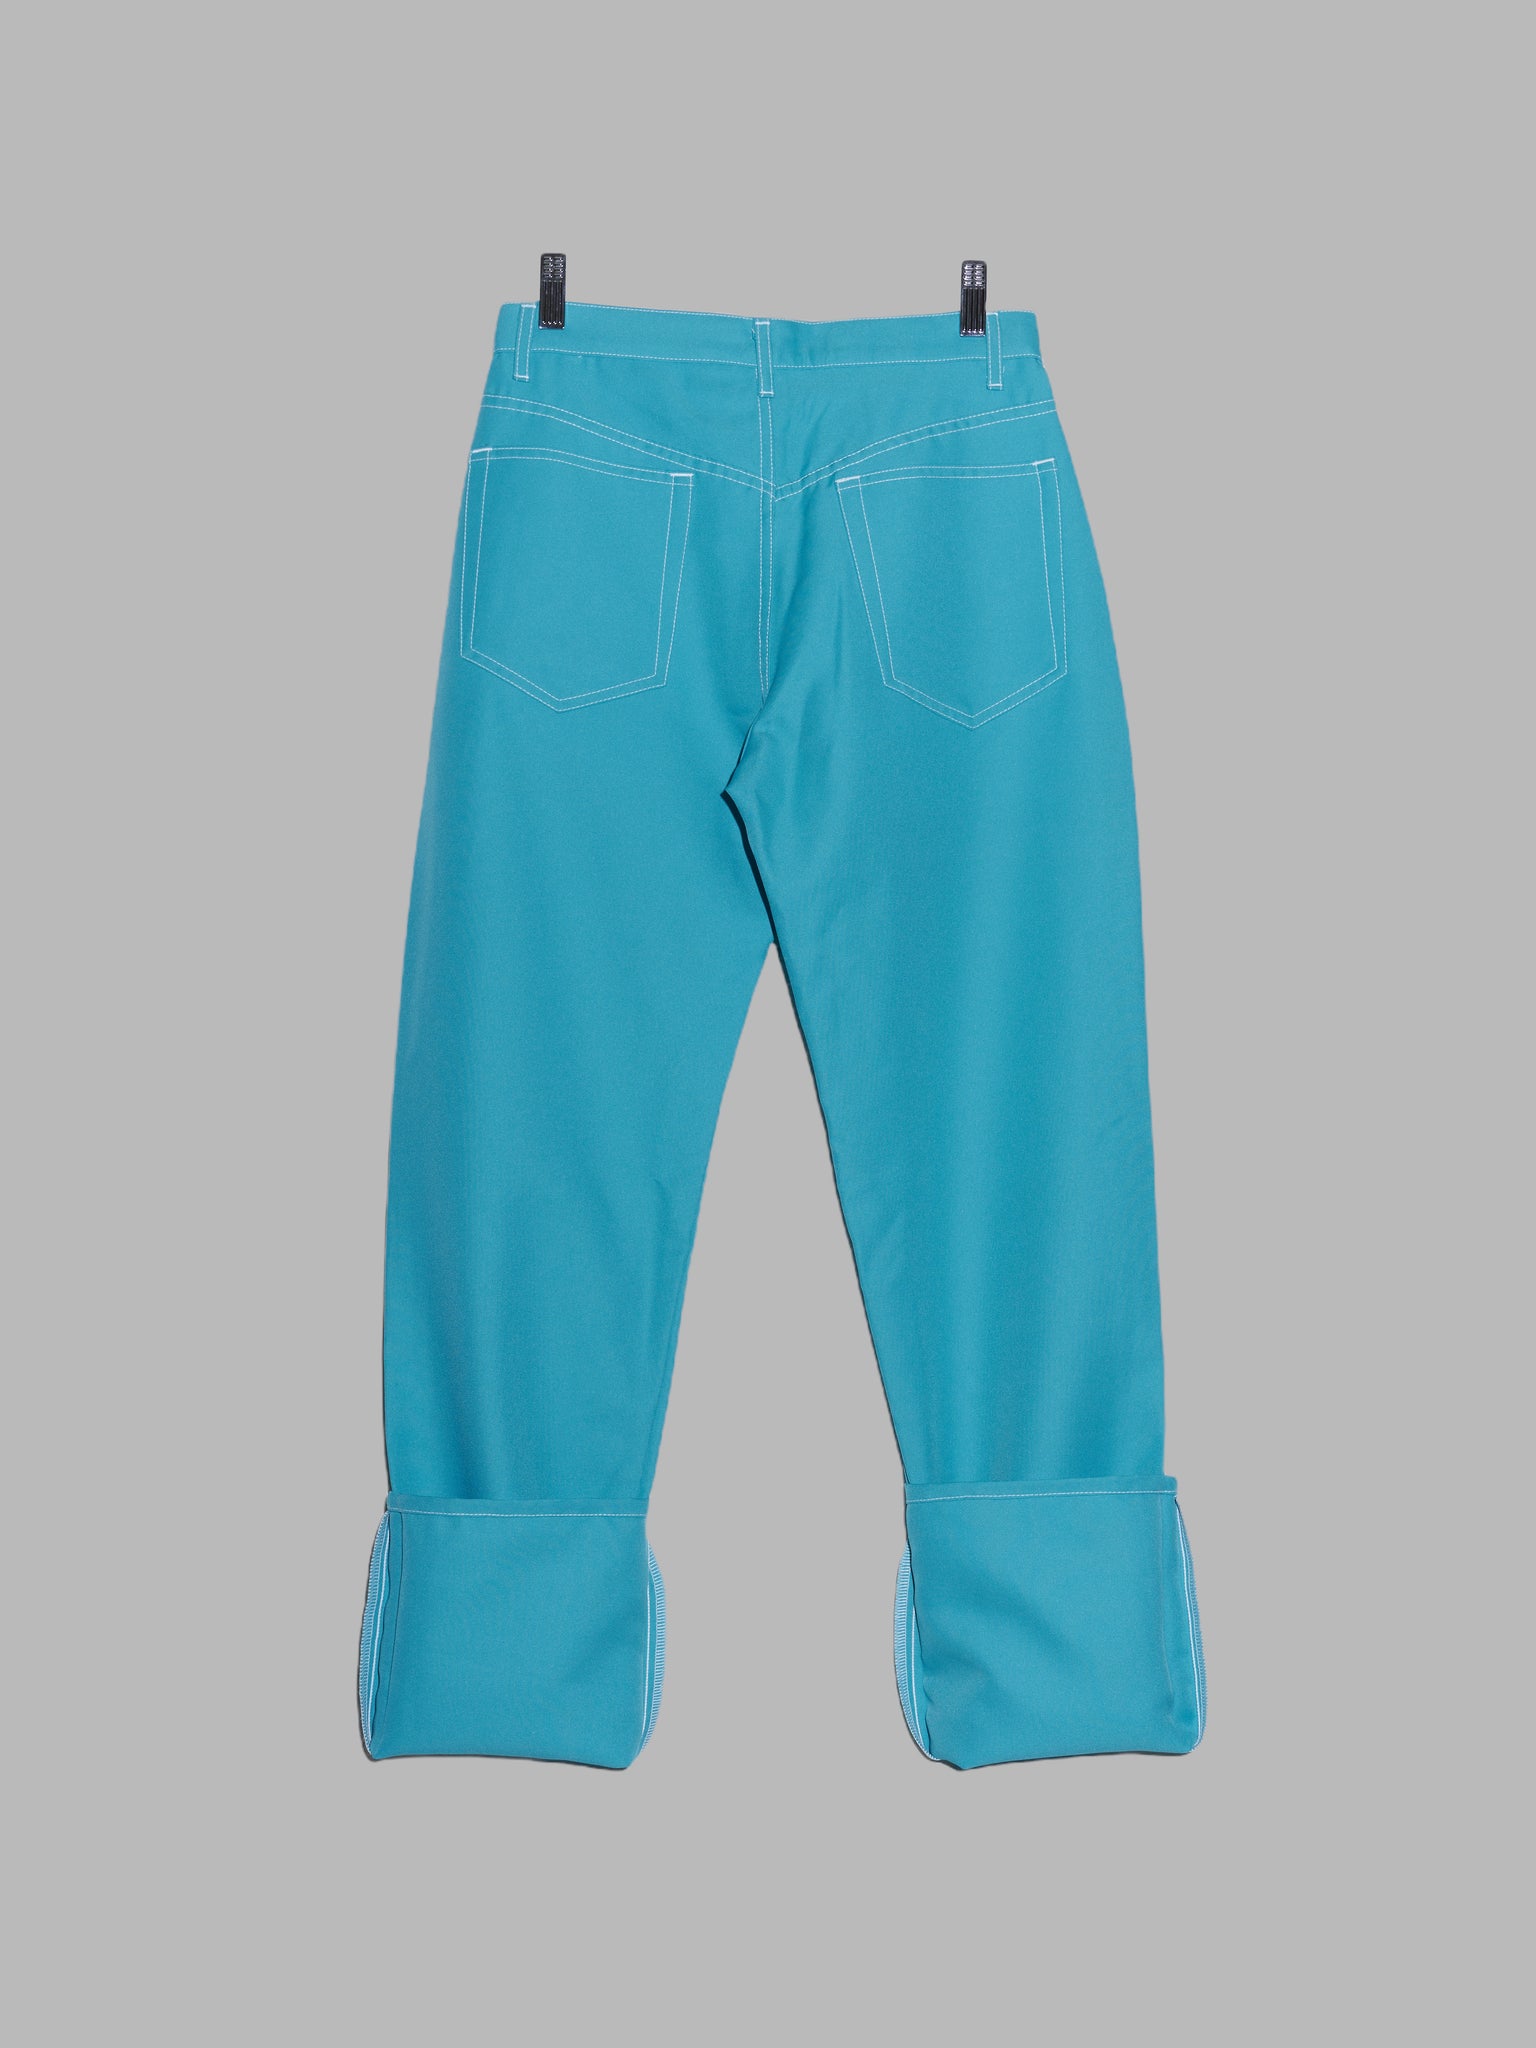 Comme des Garcons SS1996 turquoise blue polyester extra long jean trousers - M